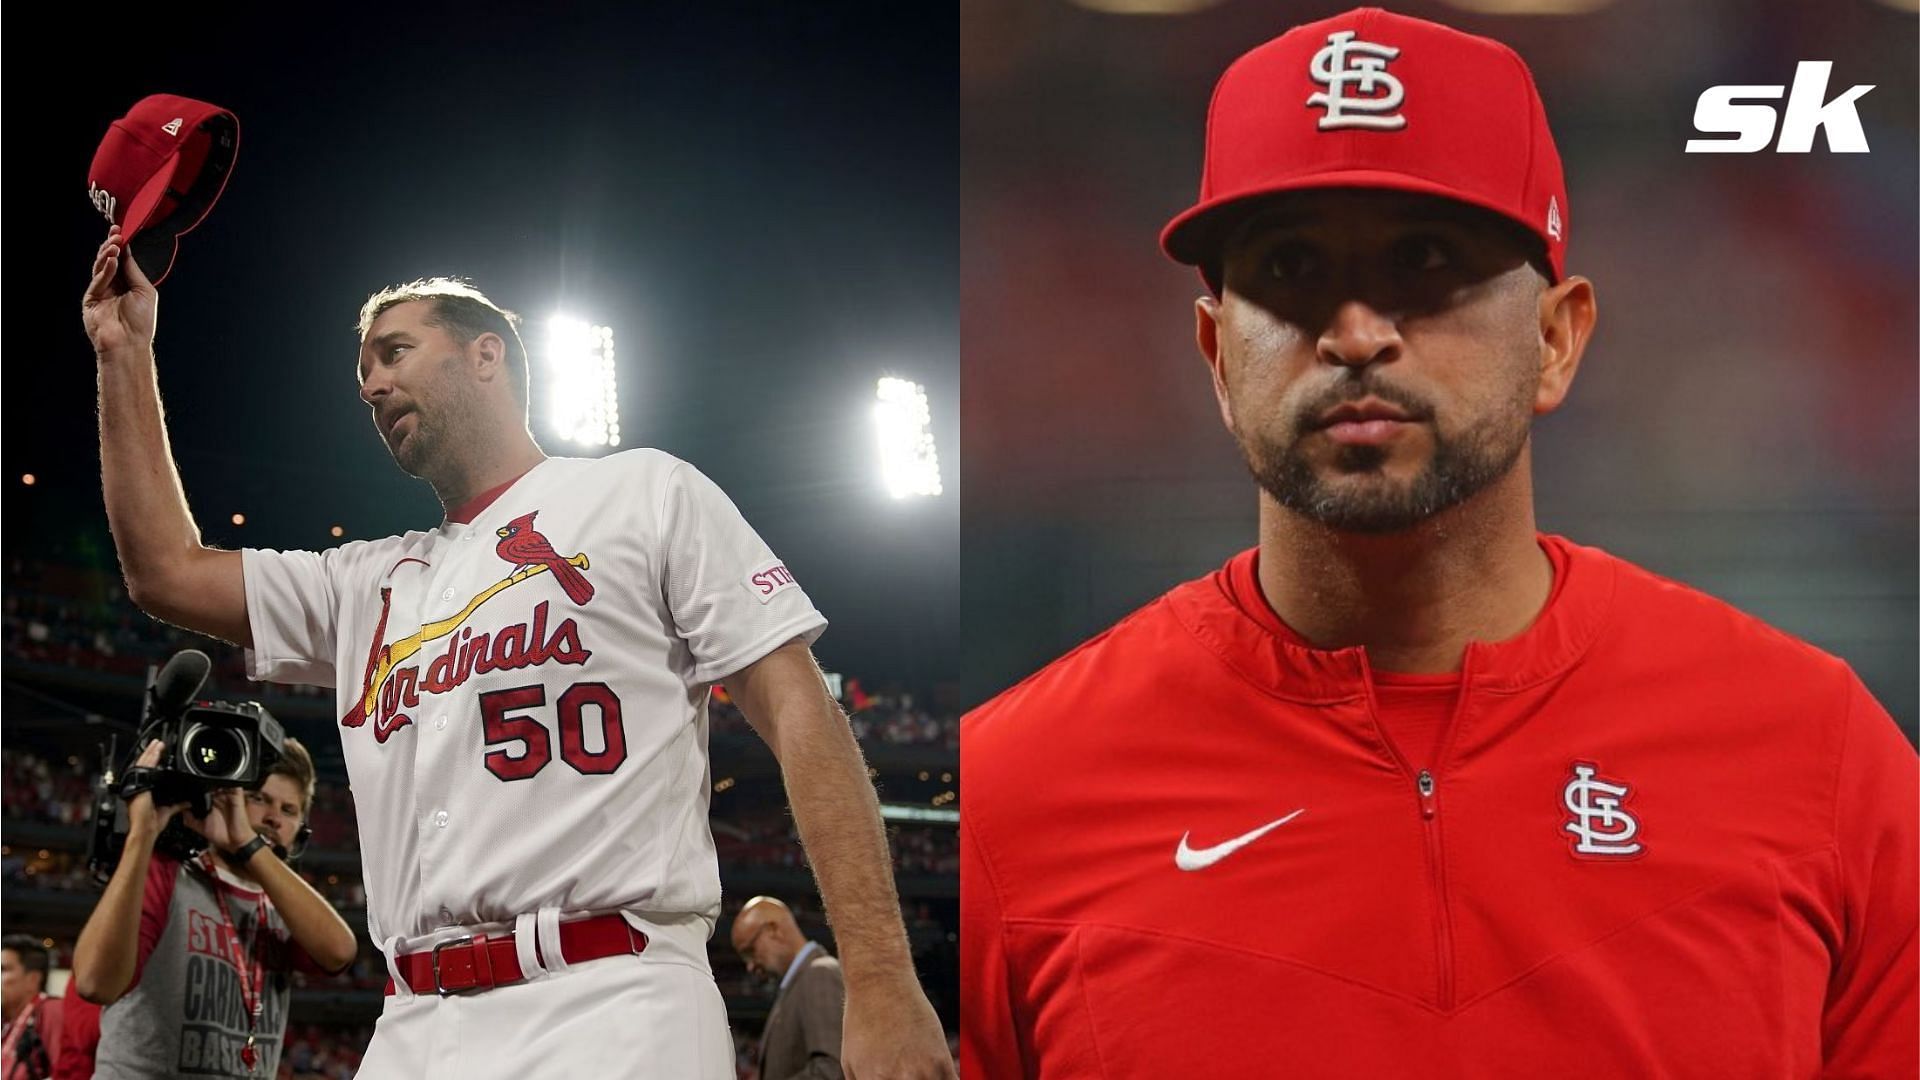 St. Louis Cardinals manager Oli Marmol said that Adam Wainwright has thrown the last pitch of his career